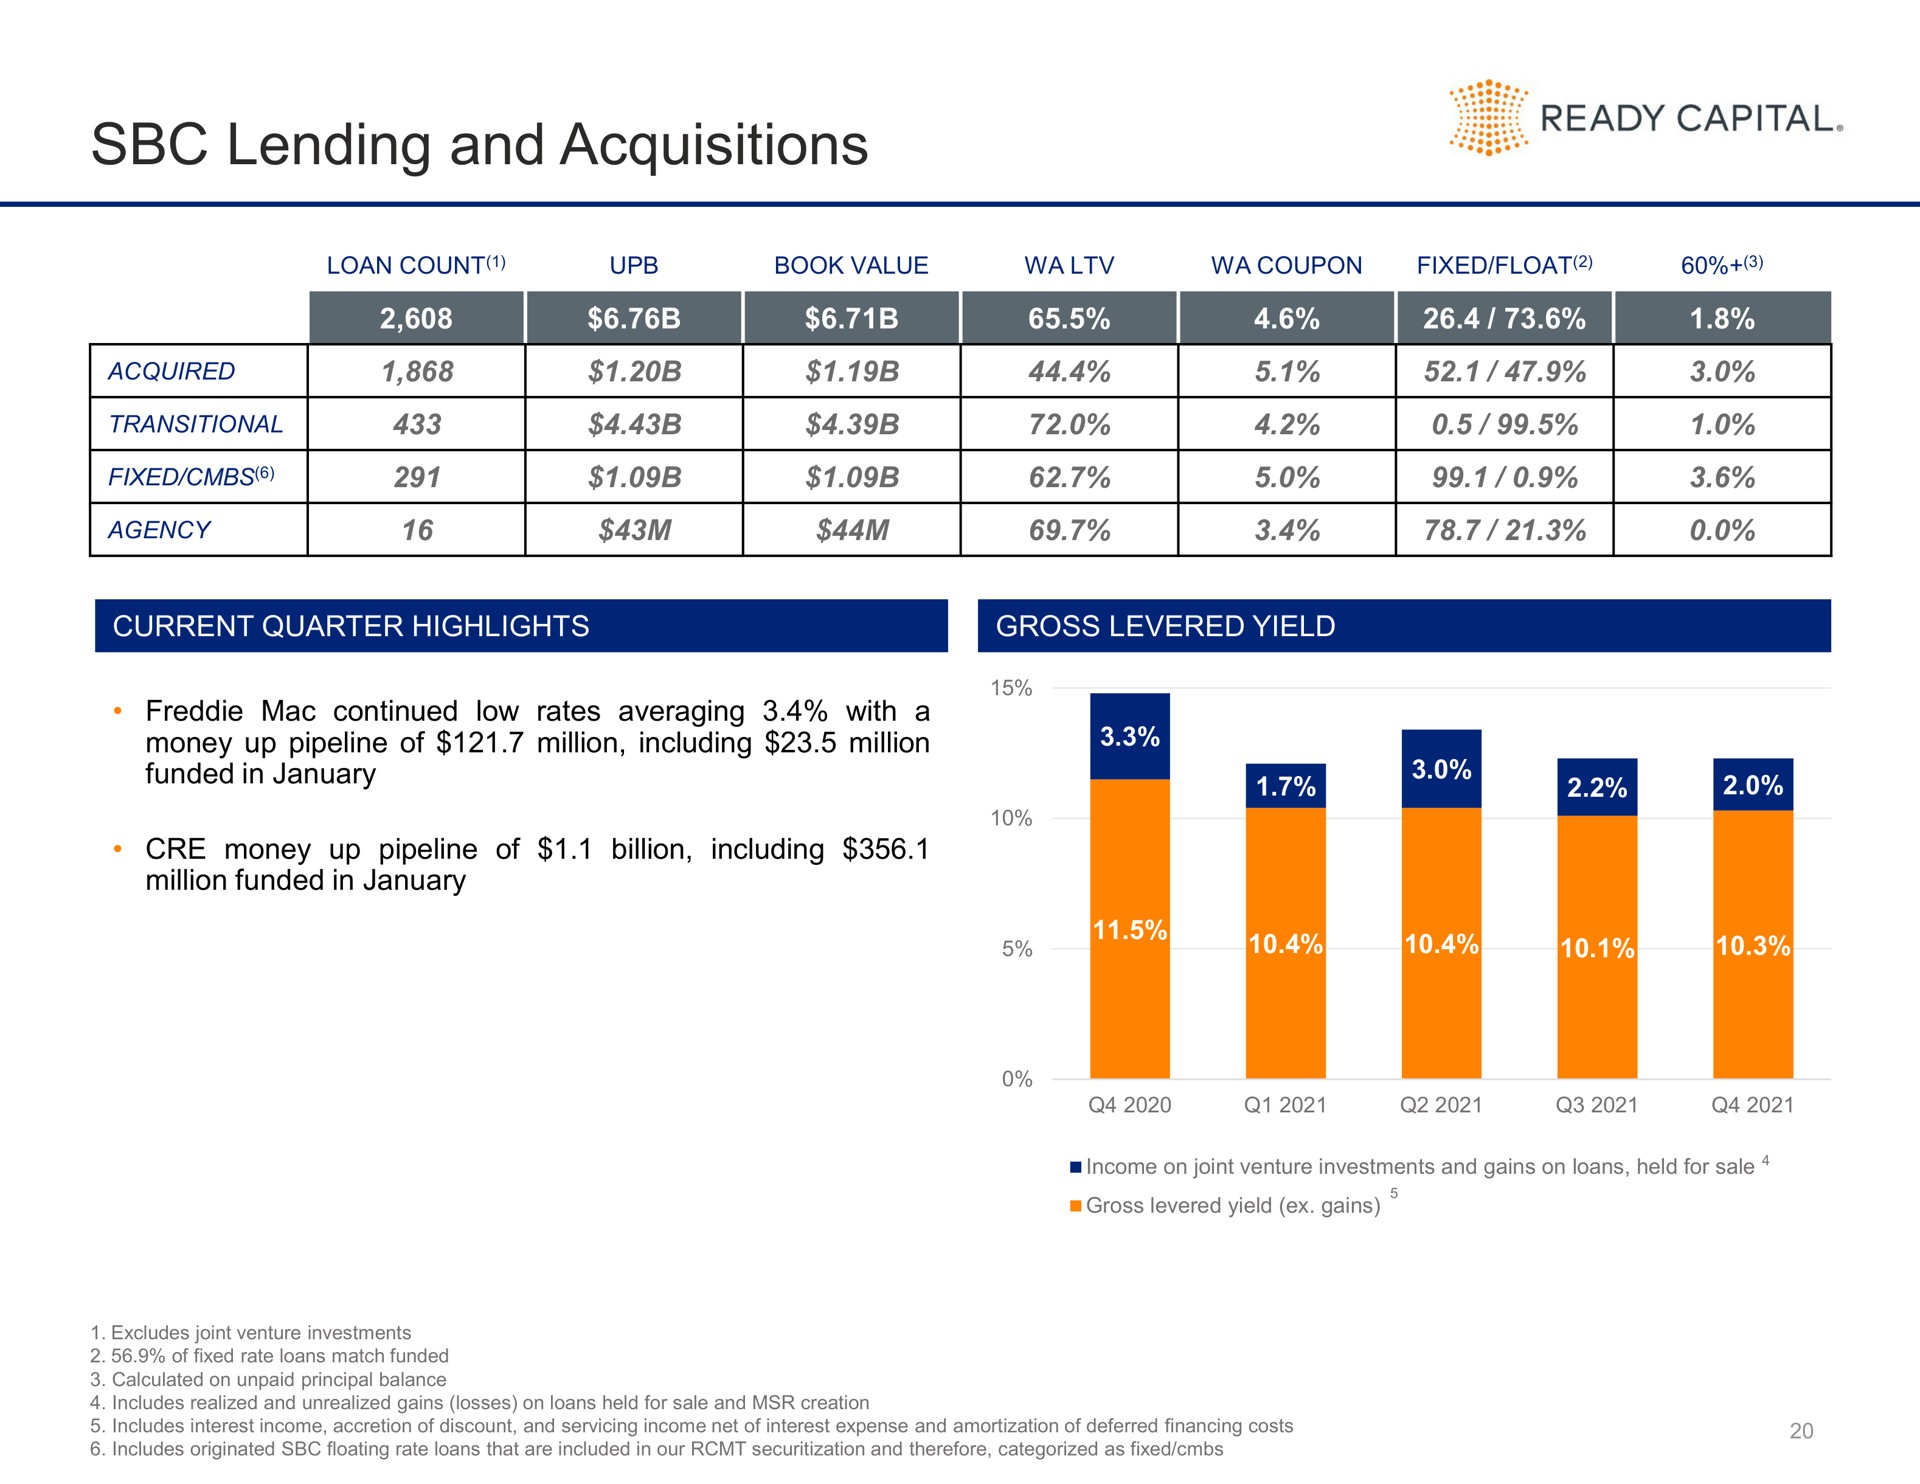 lending and acquisitions ready capital | Ready Capital